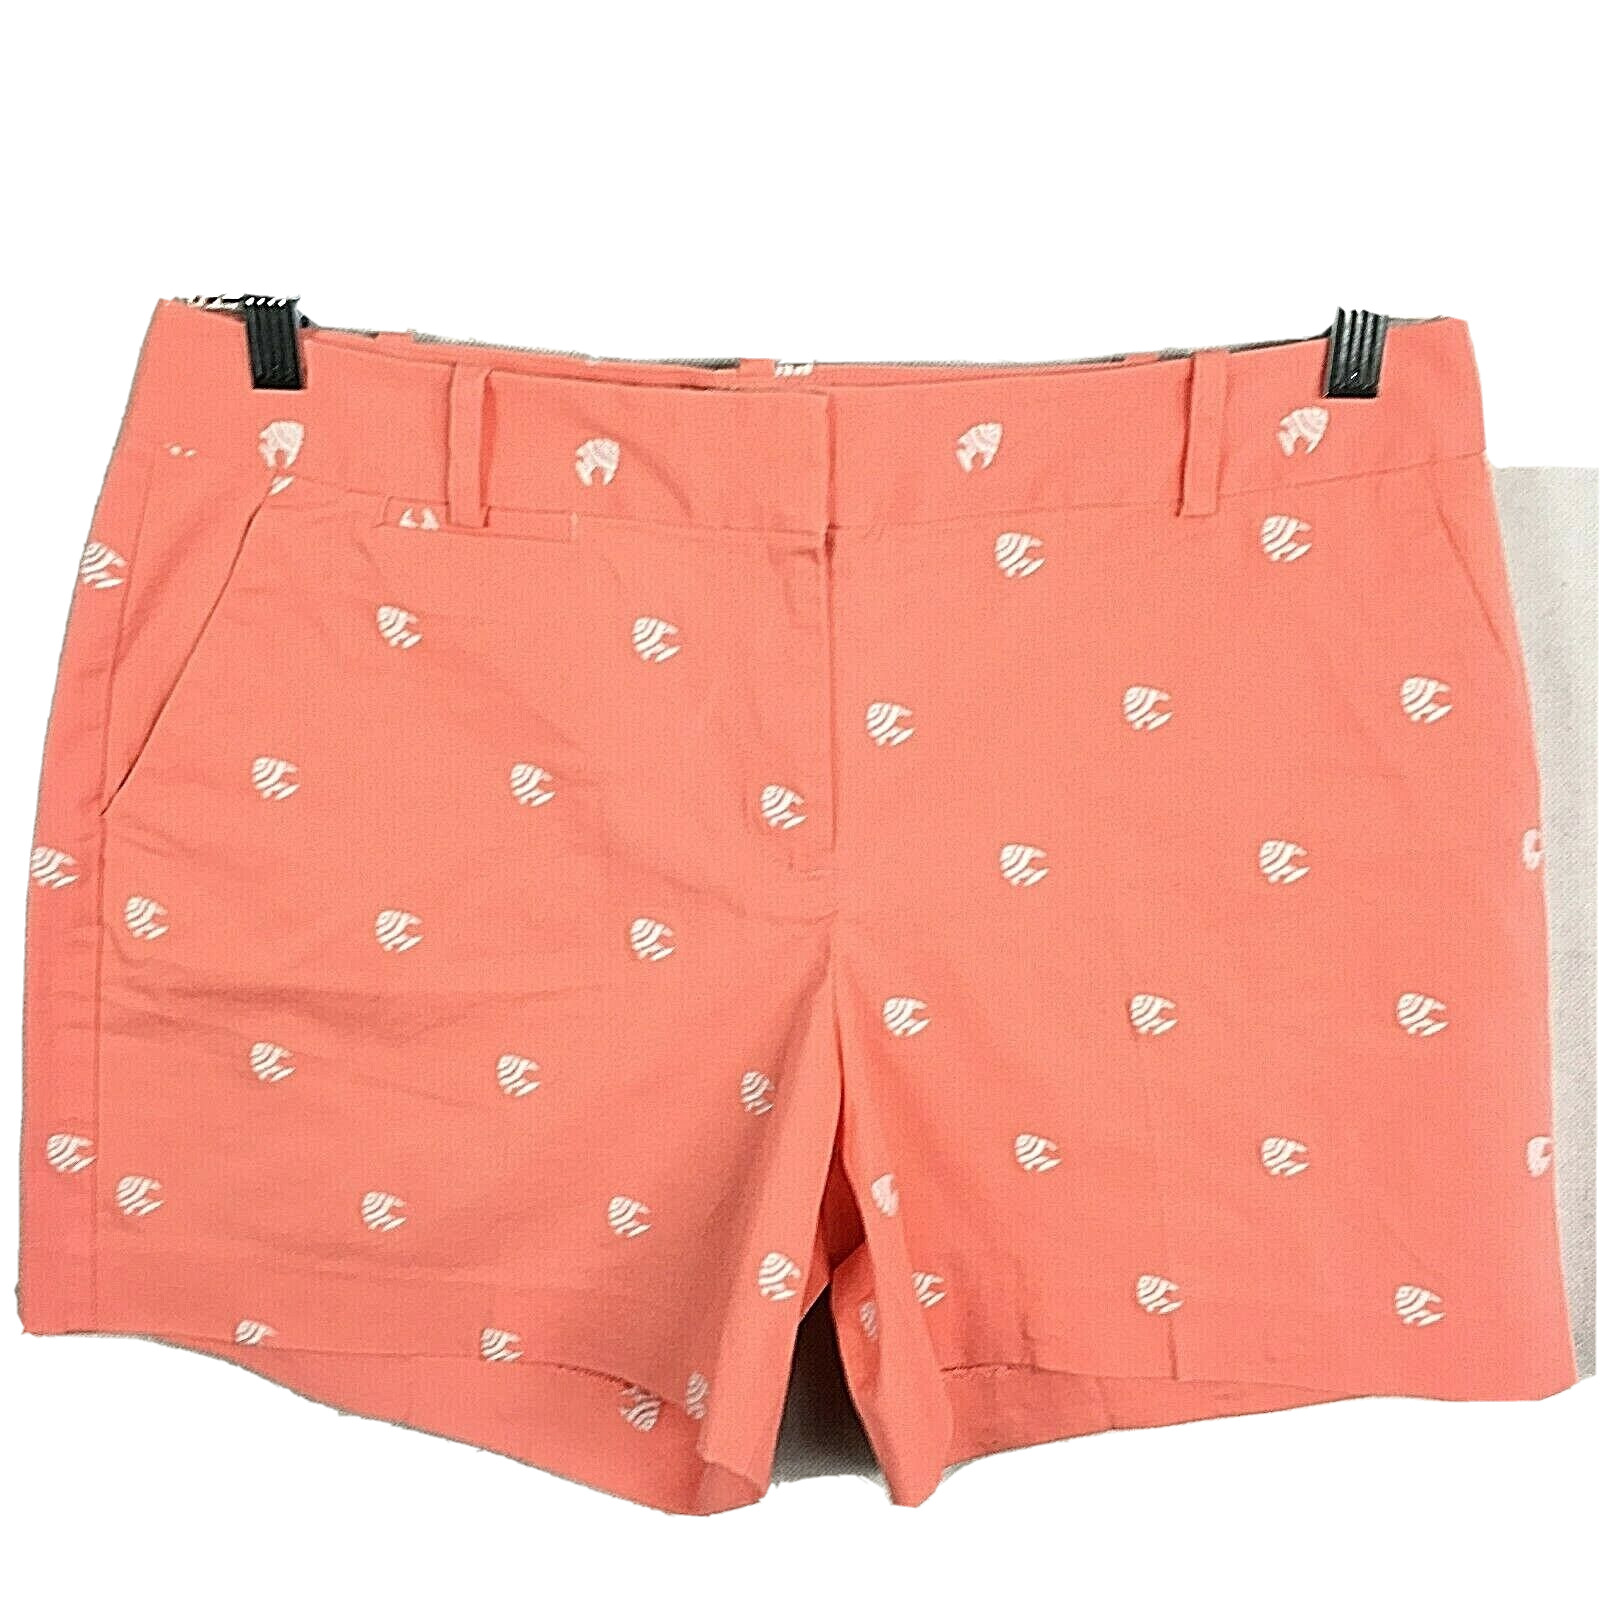 Talbots Shorts Womens Sz 10 Coral Embroidered Fish Print Cotton Stretch Chino